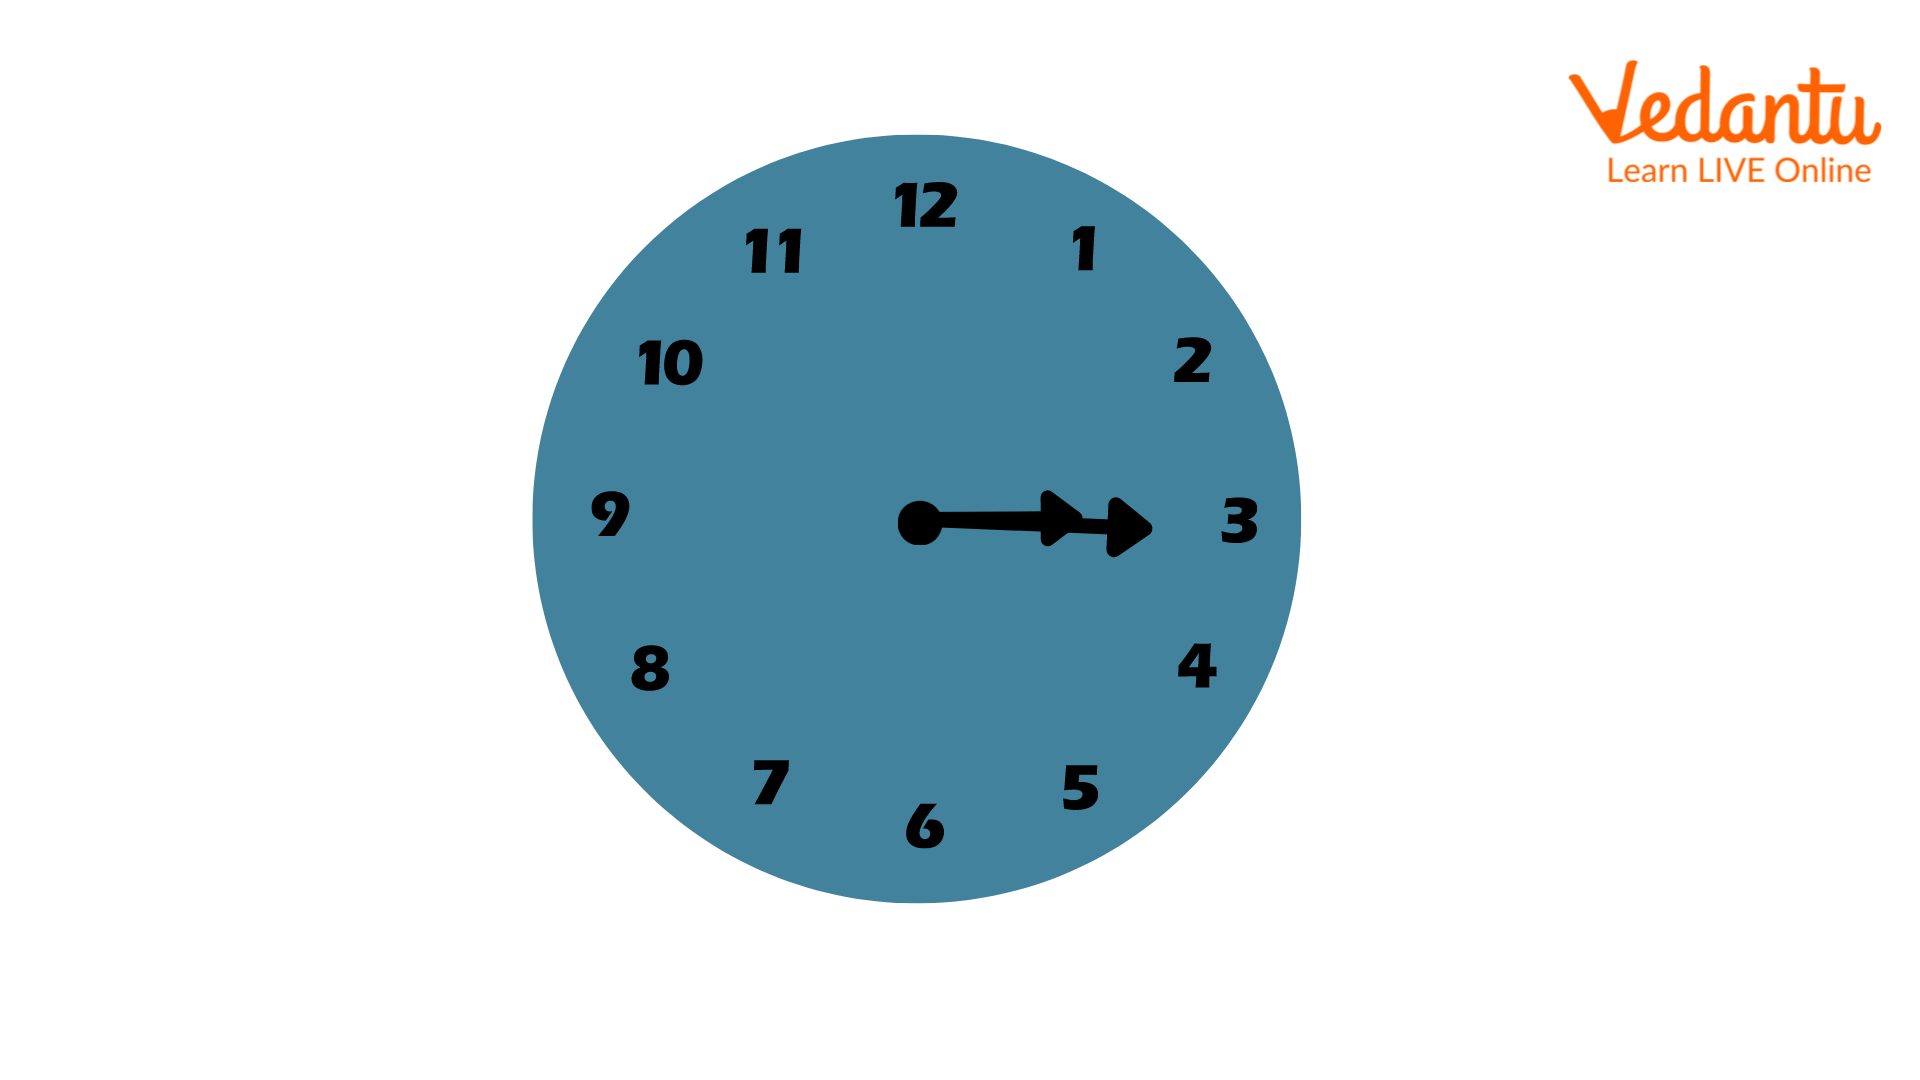 A clock, showing the time as 3:15